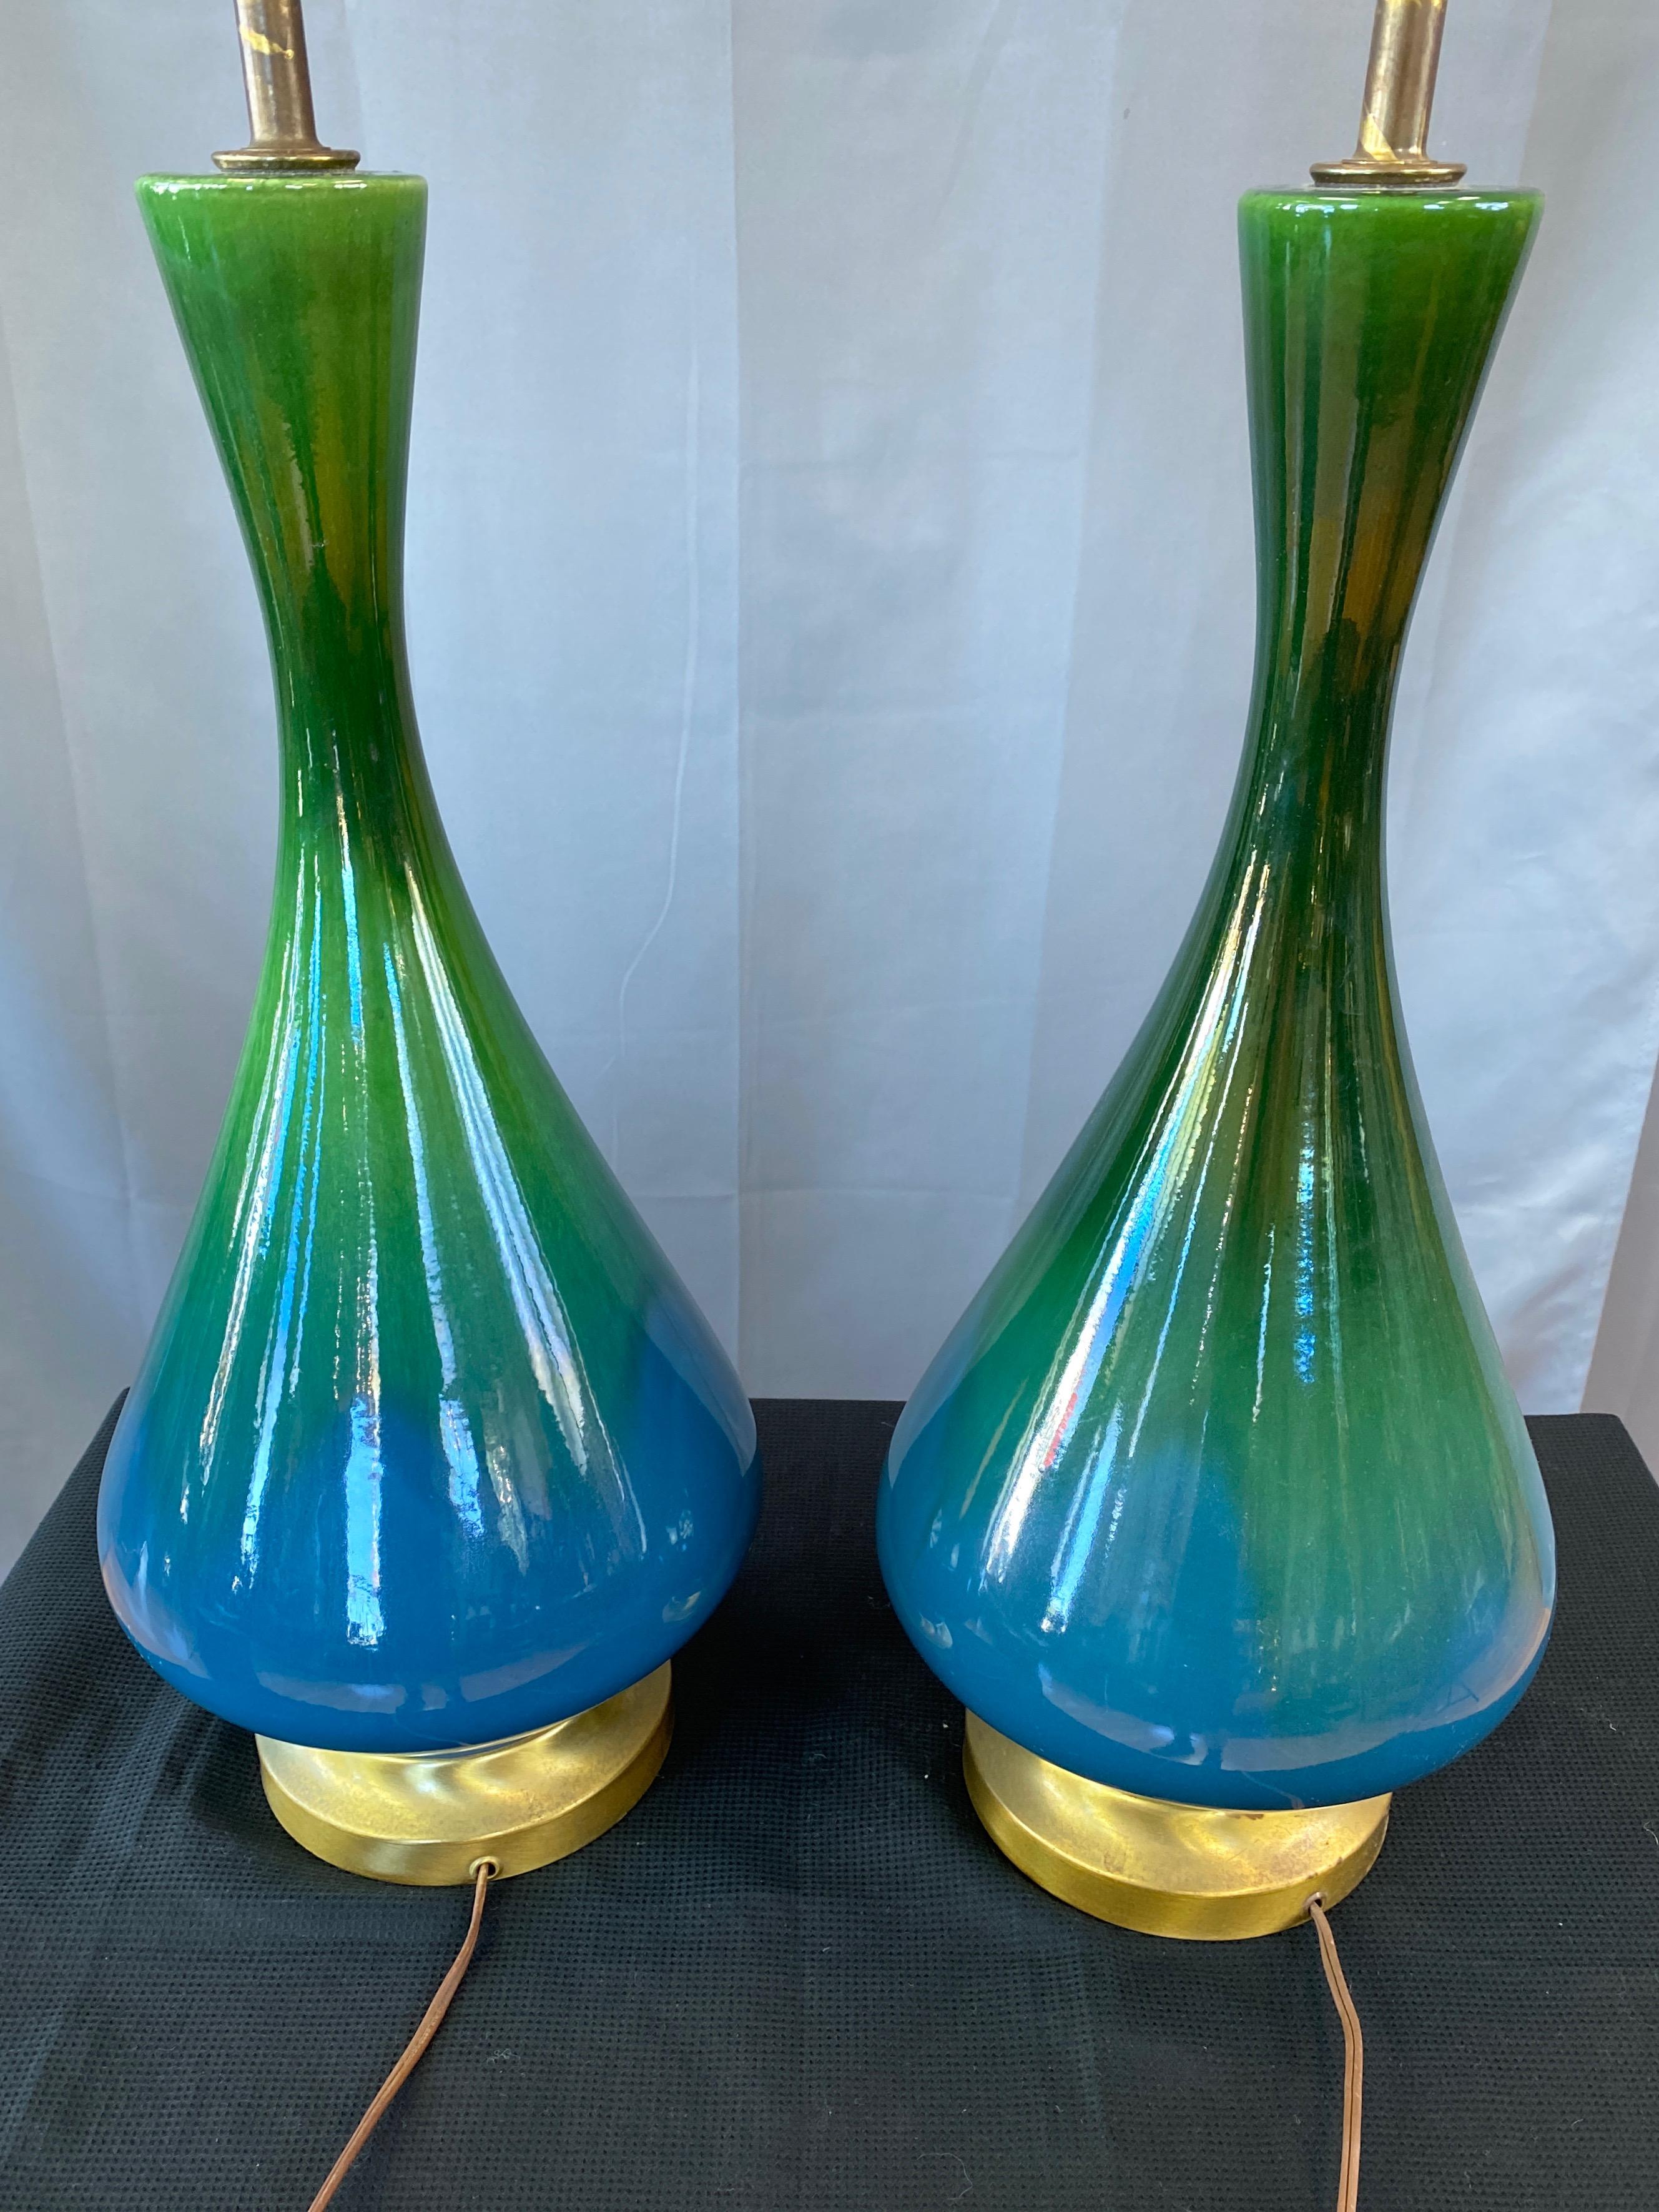 Mid-20th Century Pair of Blue-Green Ombré Glaze Ceramic and Brass Table Lamps with Shades, 1950s